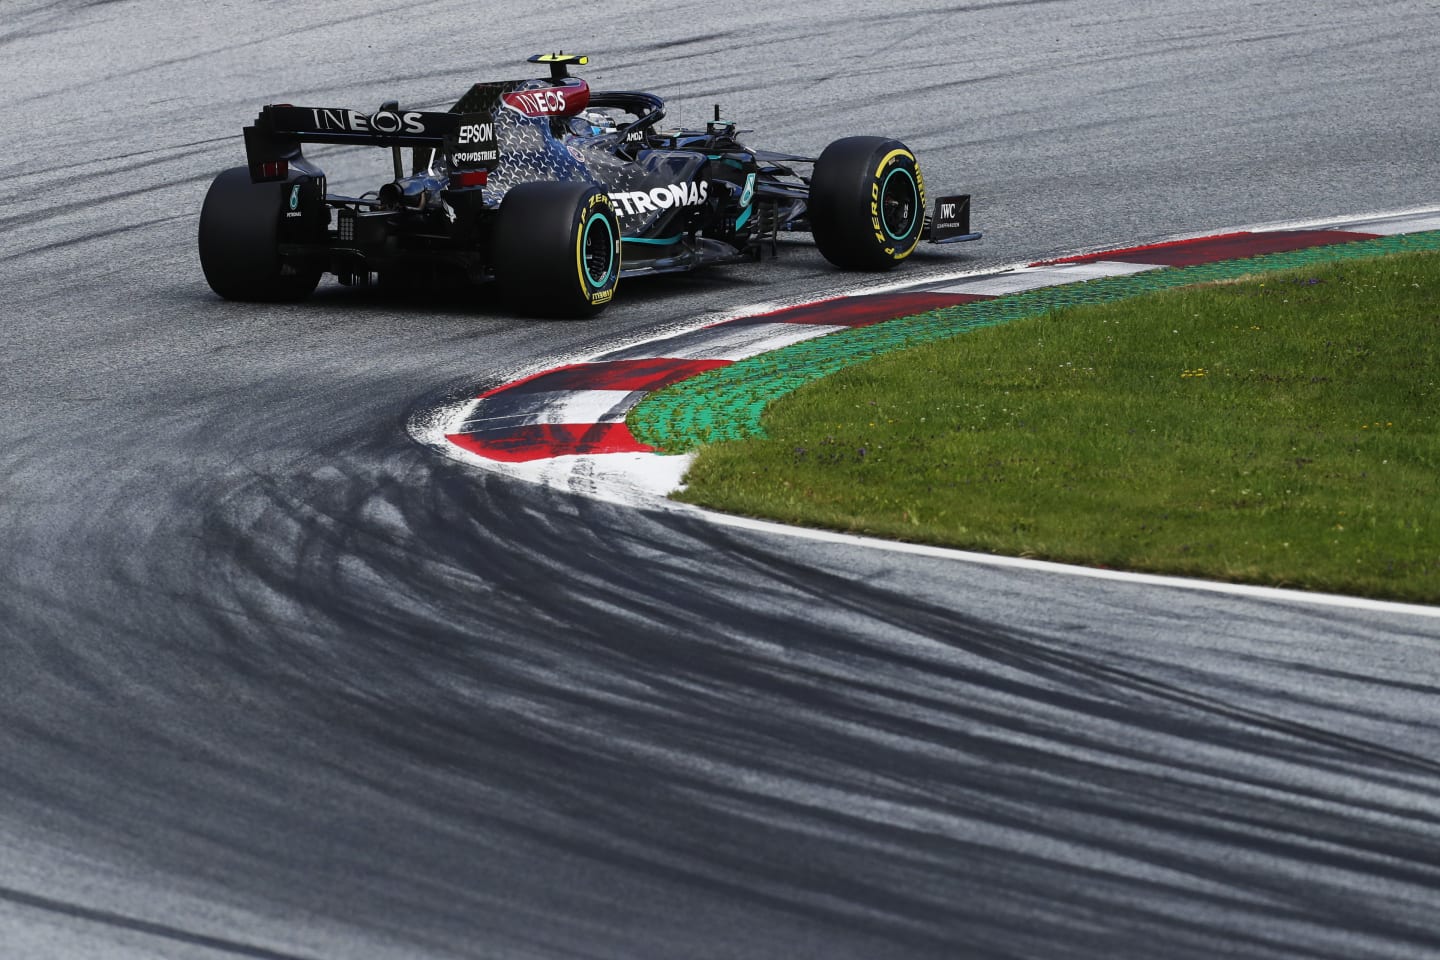 SPIELBERG, AUSTRIA - JULY 12: Valtteri Bottas of Finland driving the (77) Mercedes AMG Petronas F1 Team Mercedes W11 on track during the Formula One Grand Prix of Styria at Red Bull Ring on July 12, 2020 in Spielberg, Austria. (Photo by Darko Bandic/Pool via Getty Images)